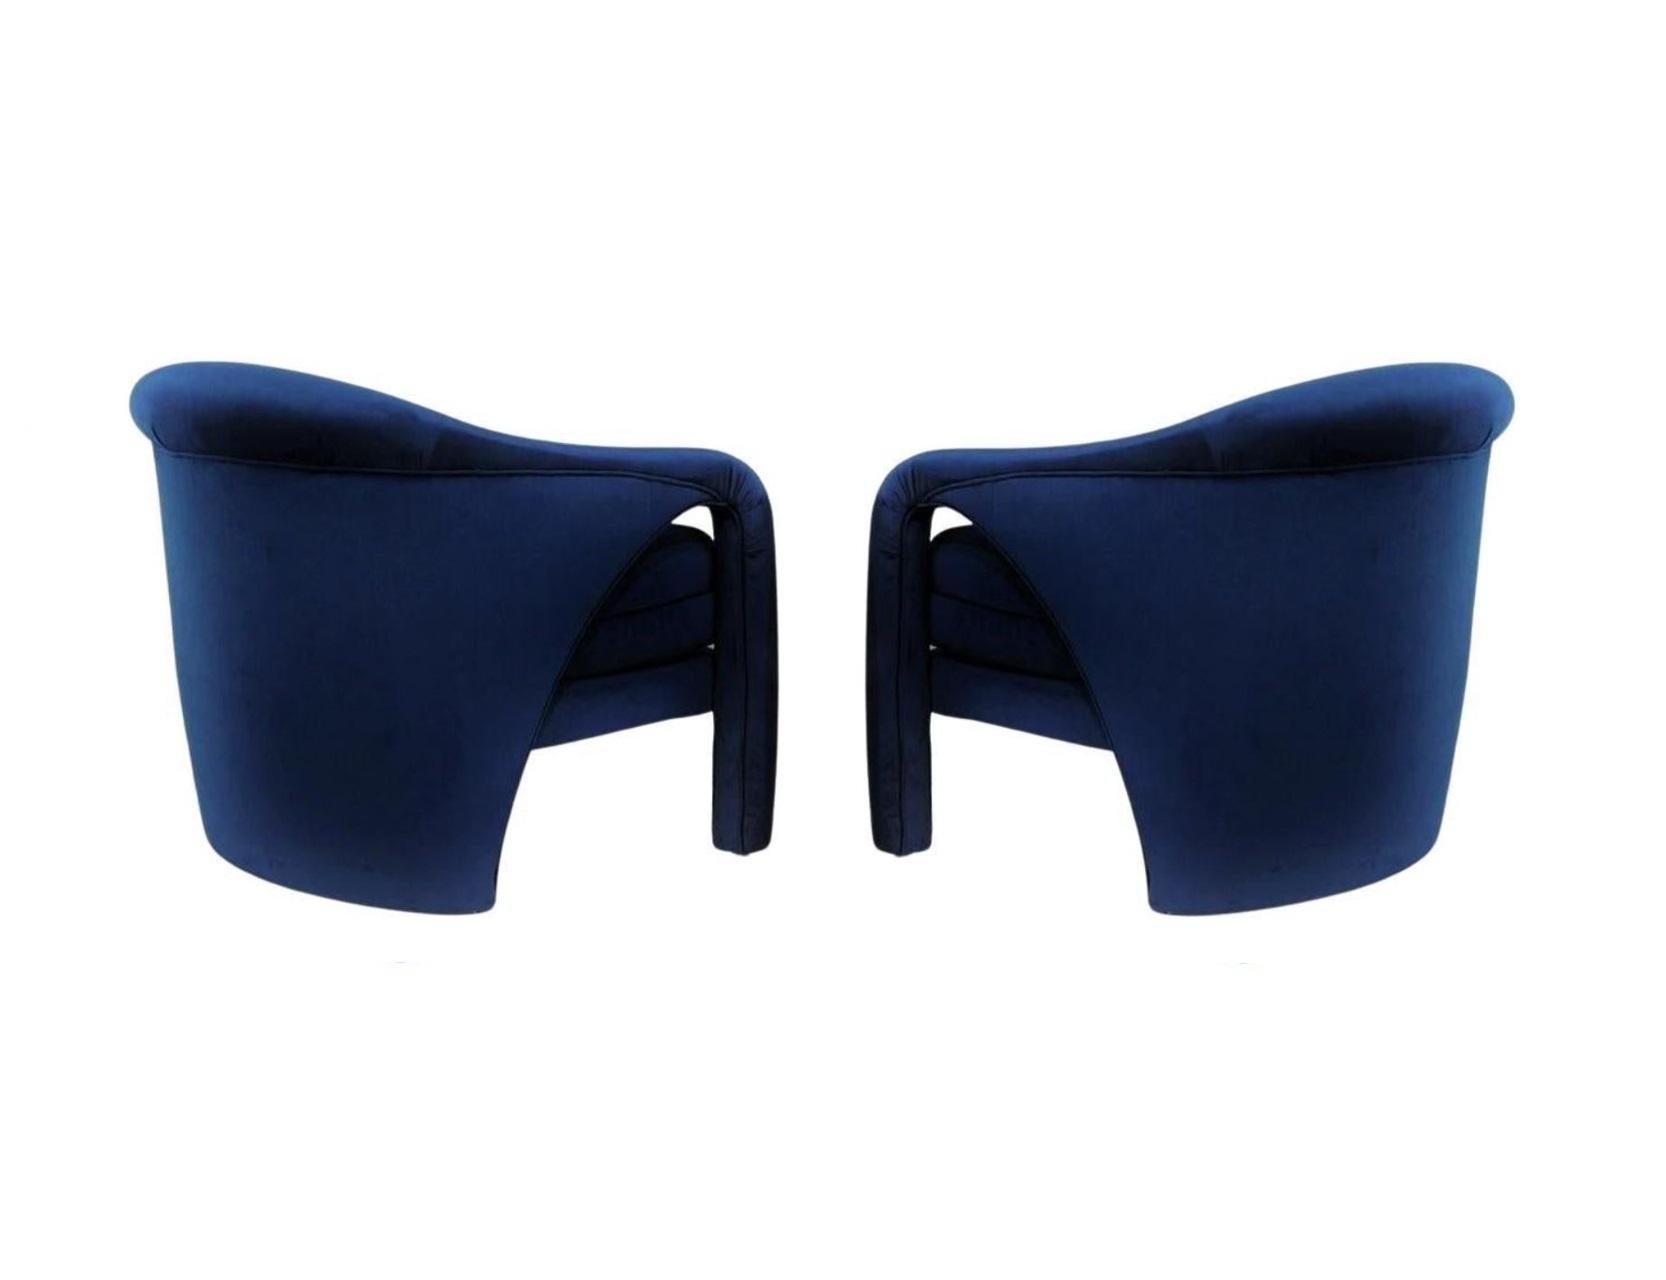 Vladimir Kaganesque Navy Blue Lounge Chairs by Weiman For Sale 3